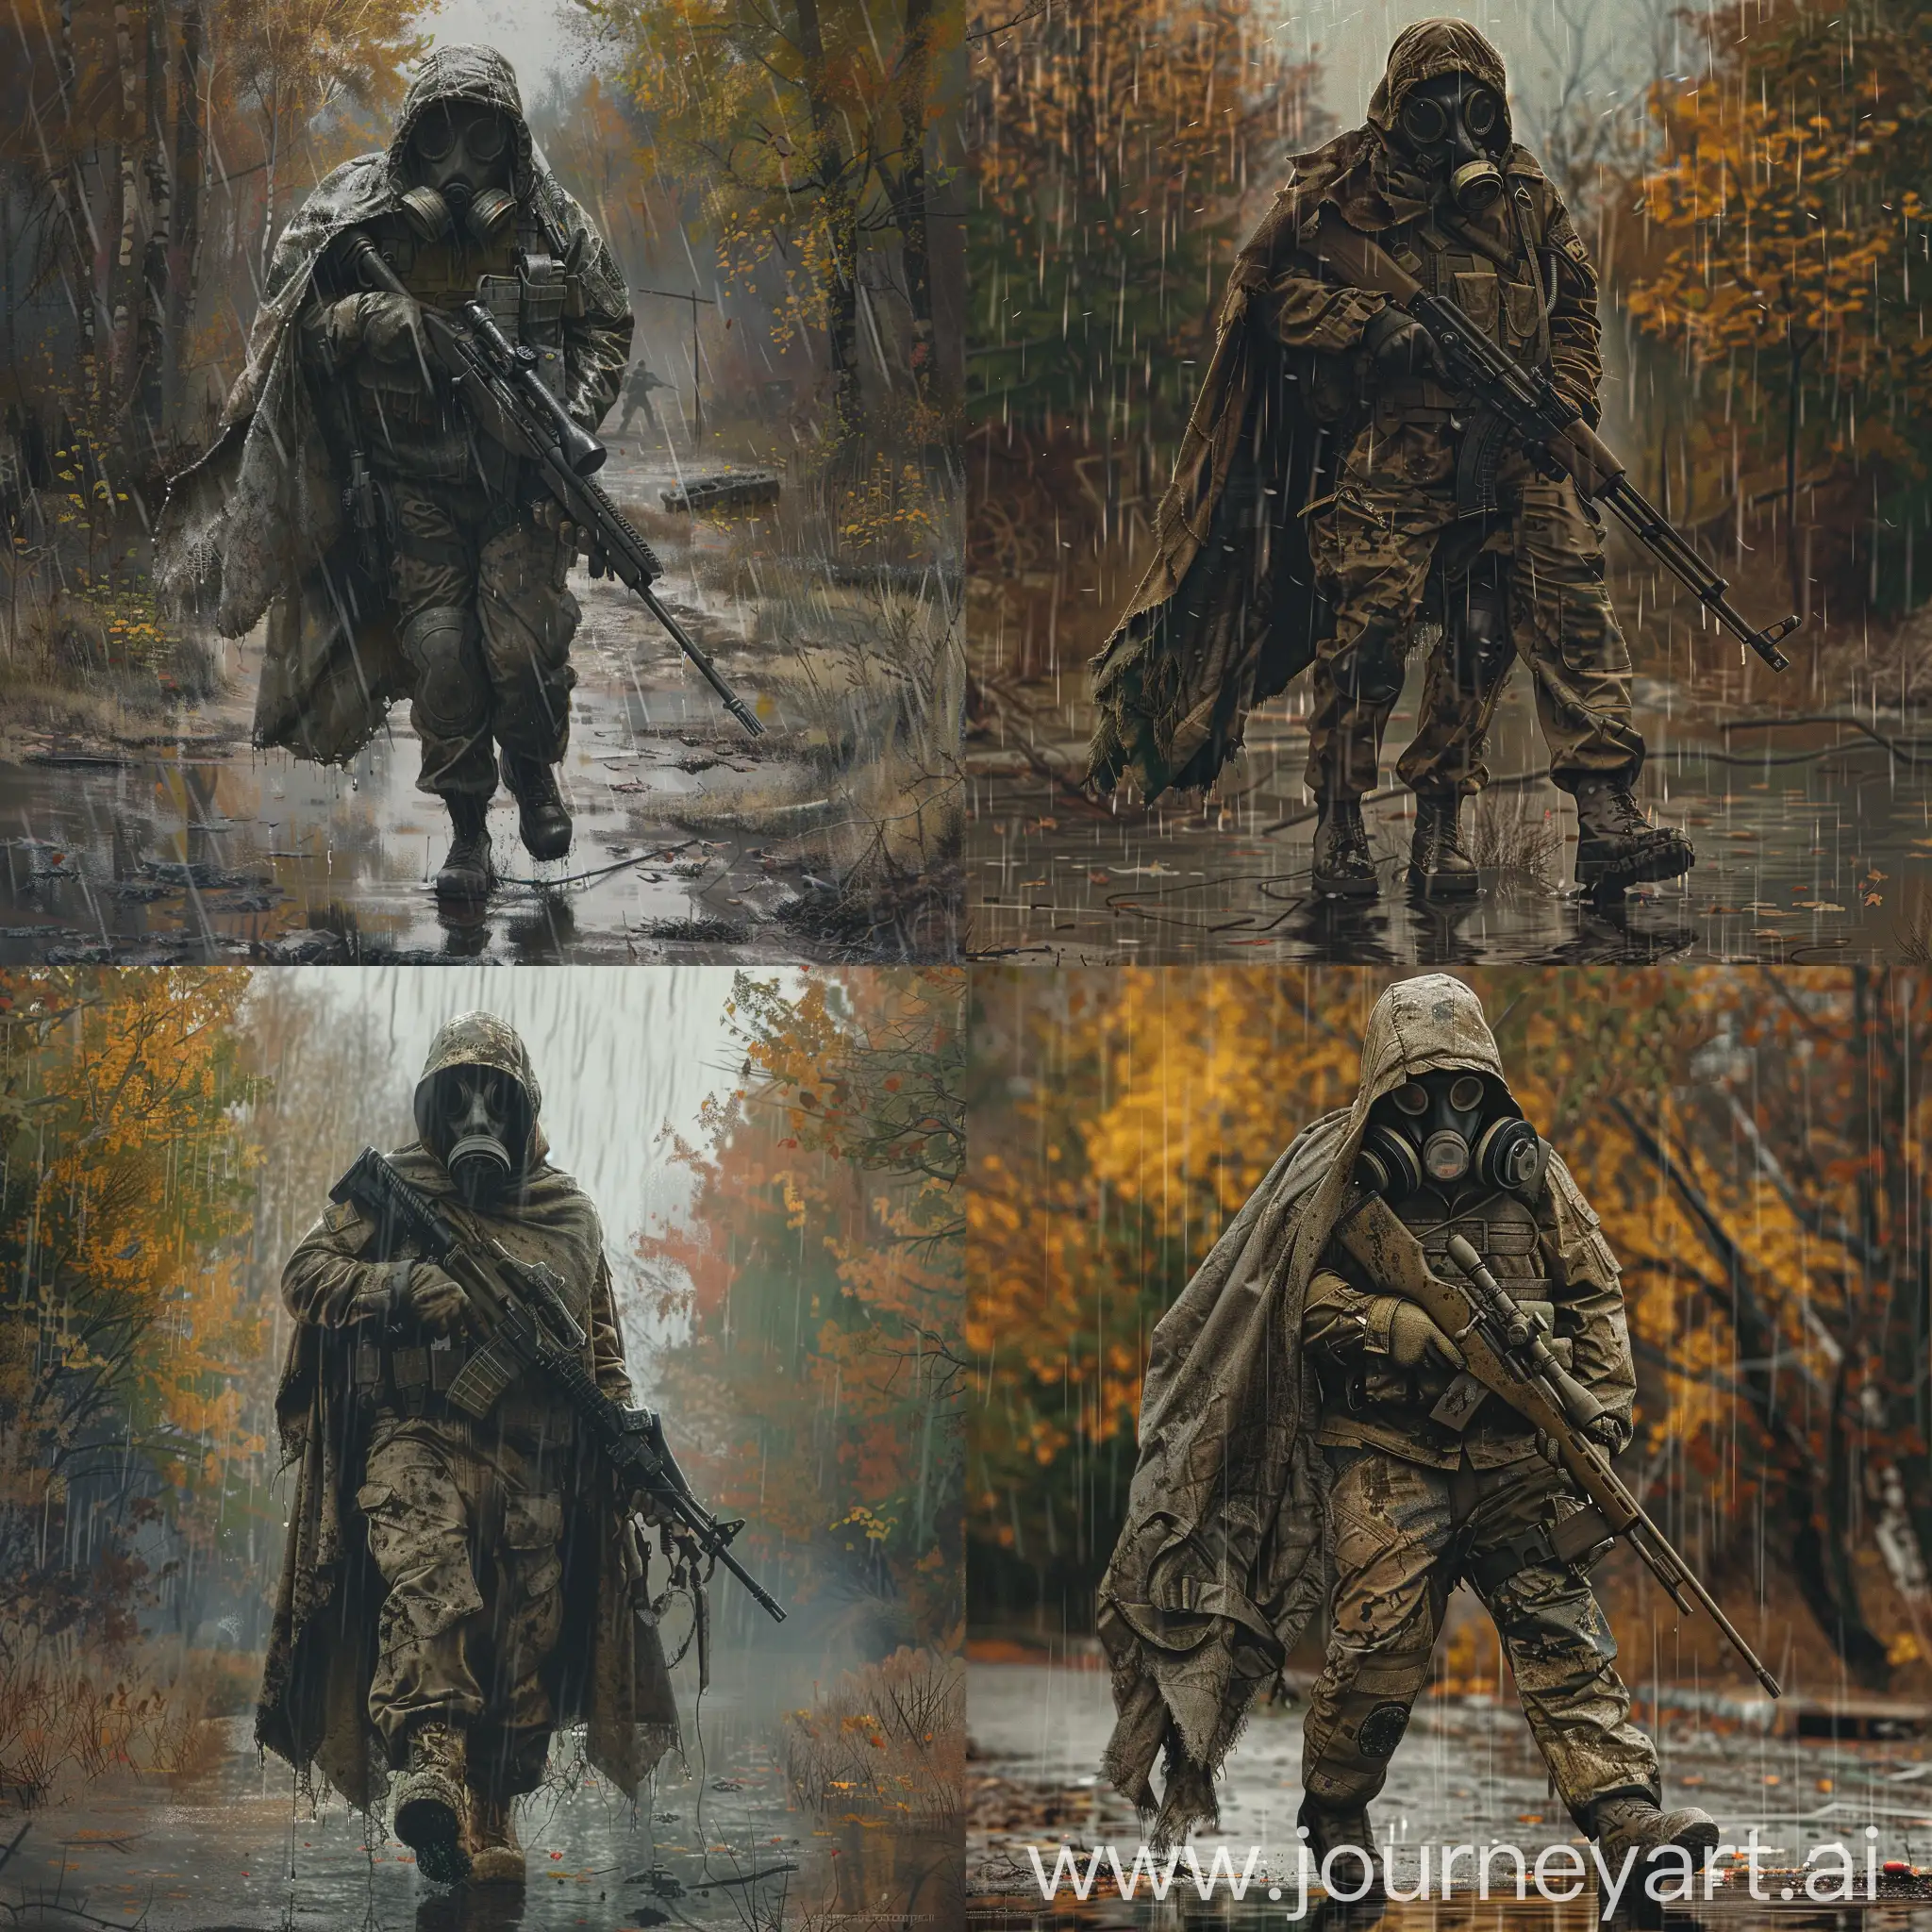 Stalker art, Stalker walks in random location in Chernobyl, a dirty military jumpsuit on the stalker, a dirty cloth cape from the rain on top of the jumpsuit, a gasmask on his face, a sniper rifle in his hands, gloomy autumn.